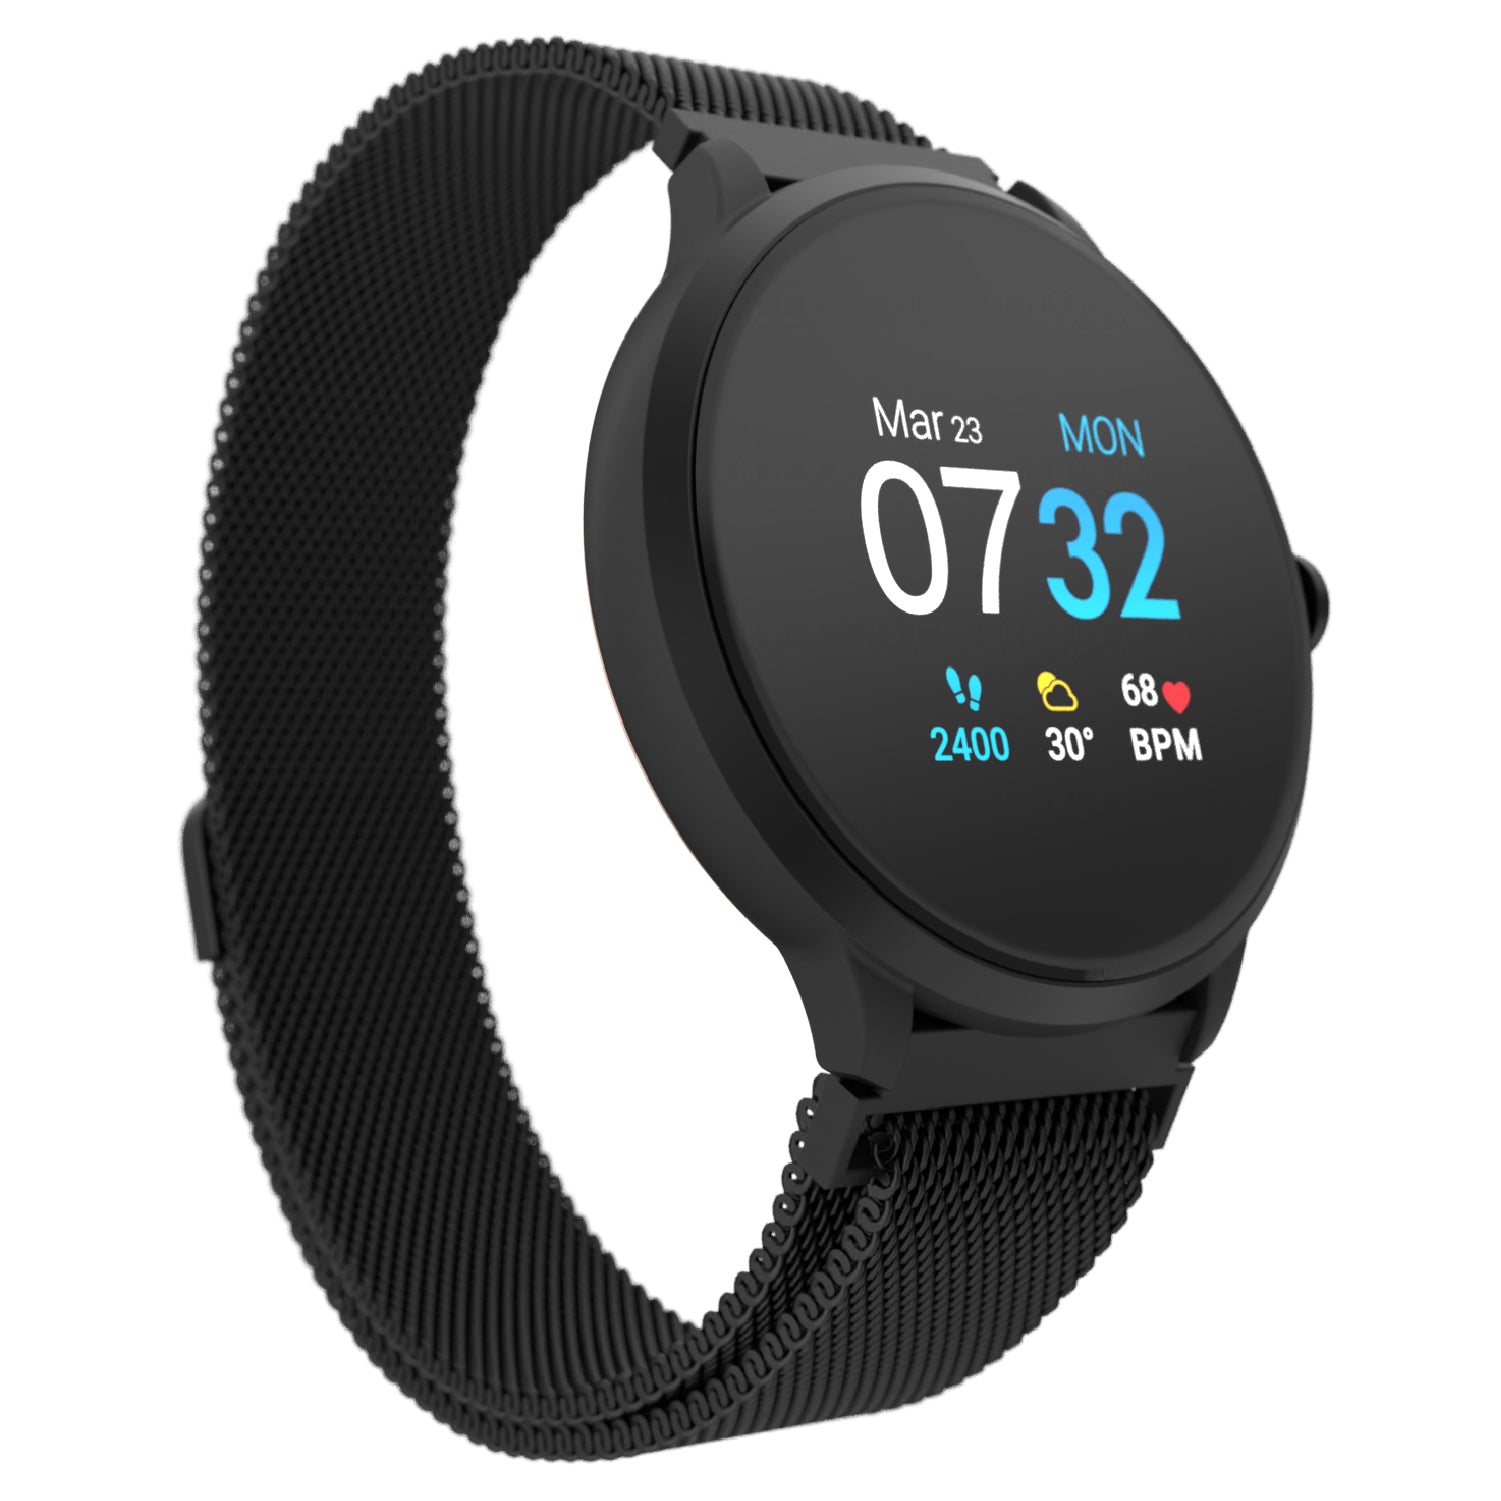 iTouch Sport 3 Smartwatch in Black with Black Mesh Strap